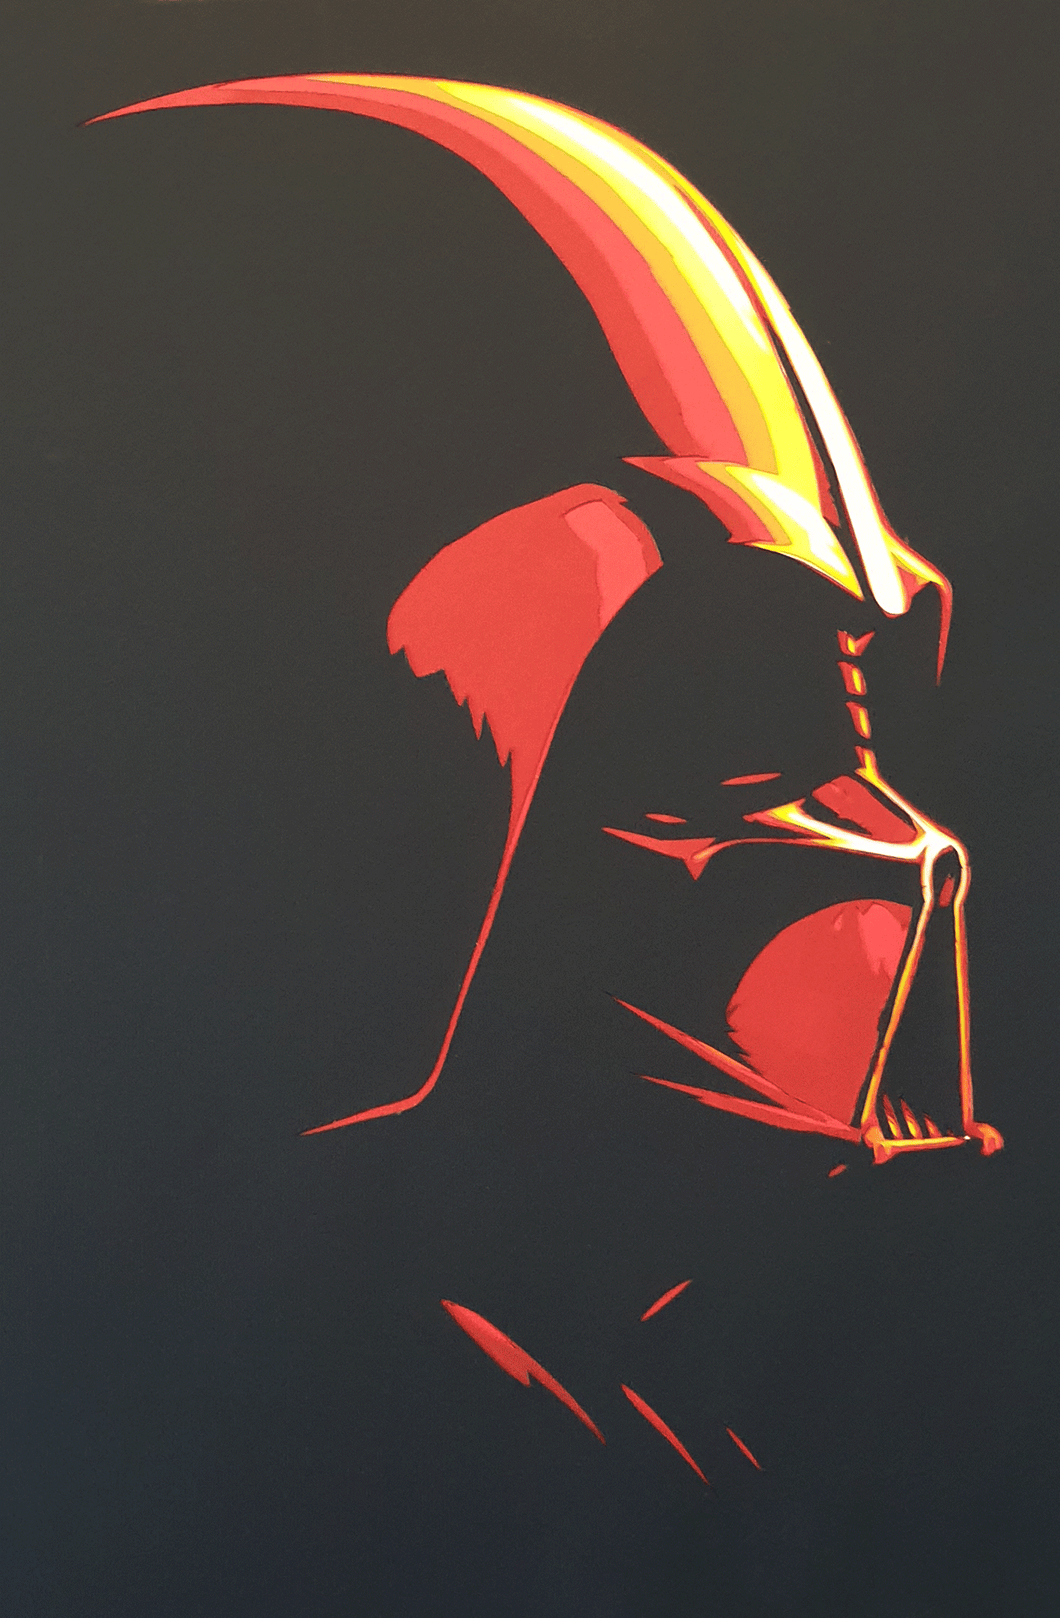 Darth Vader Fire Version by Rick Sharif - FRAMED  [A3 Size (297 x 420 mm) (11.7 x 16.5 in) in a FRAME]